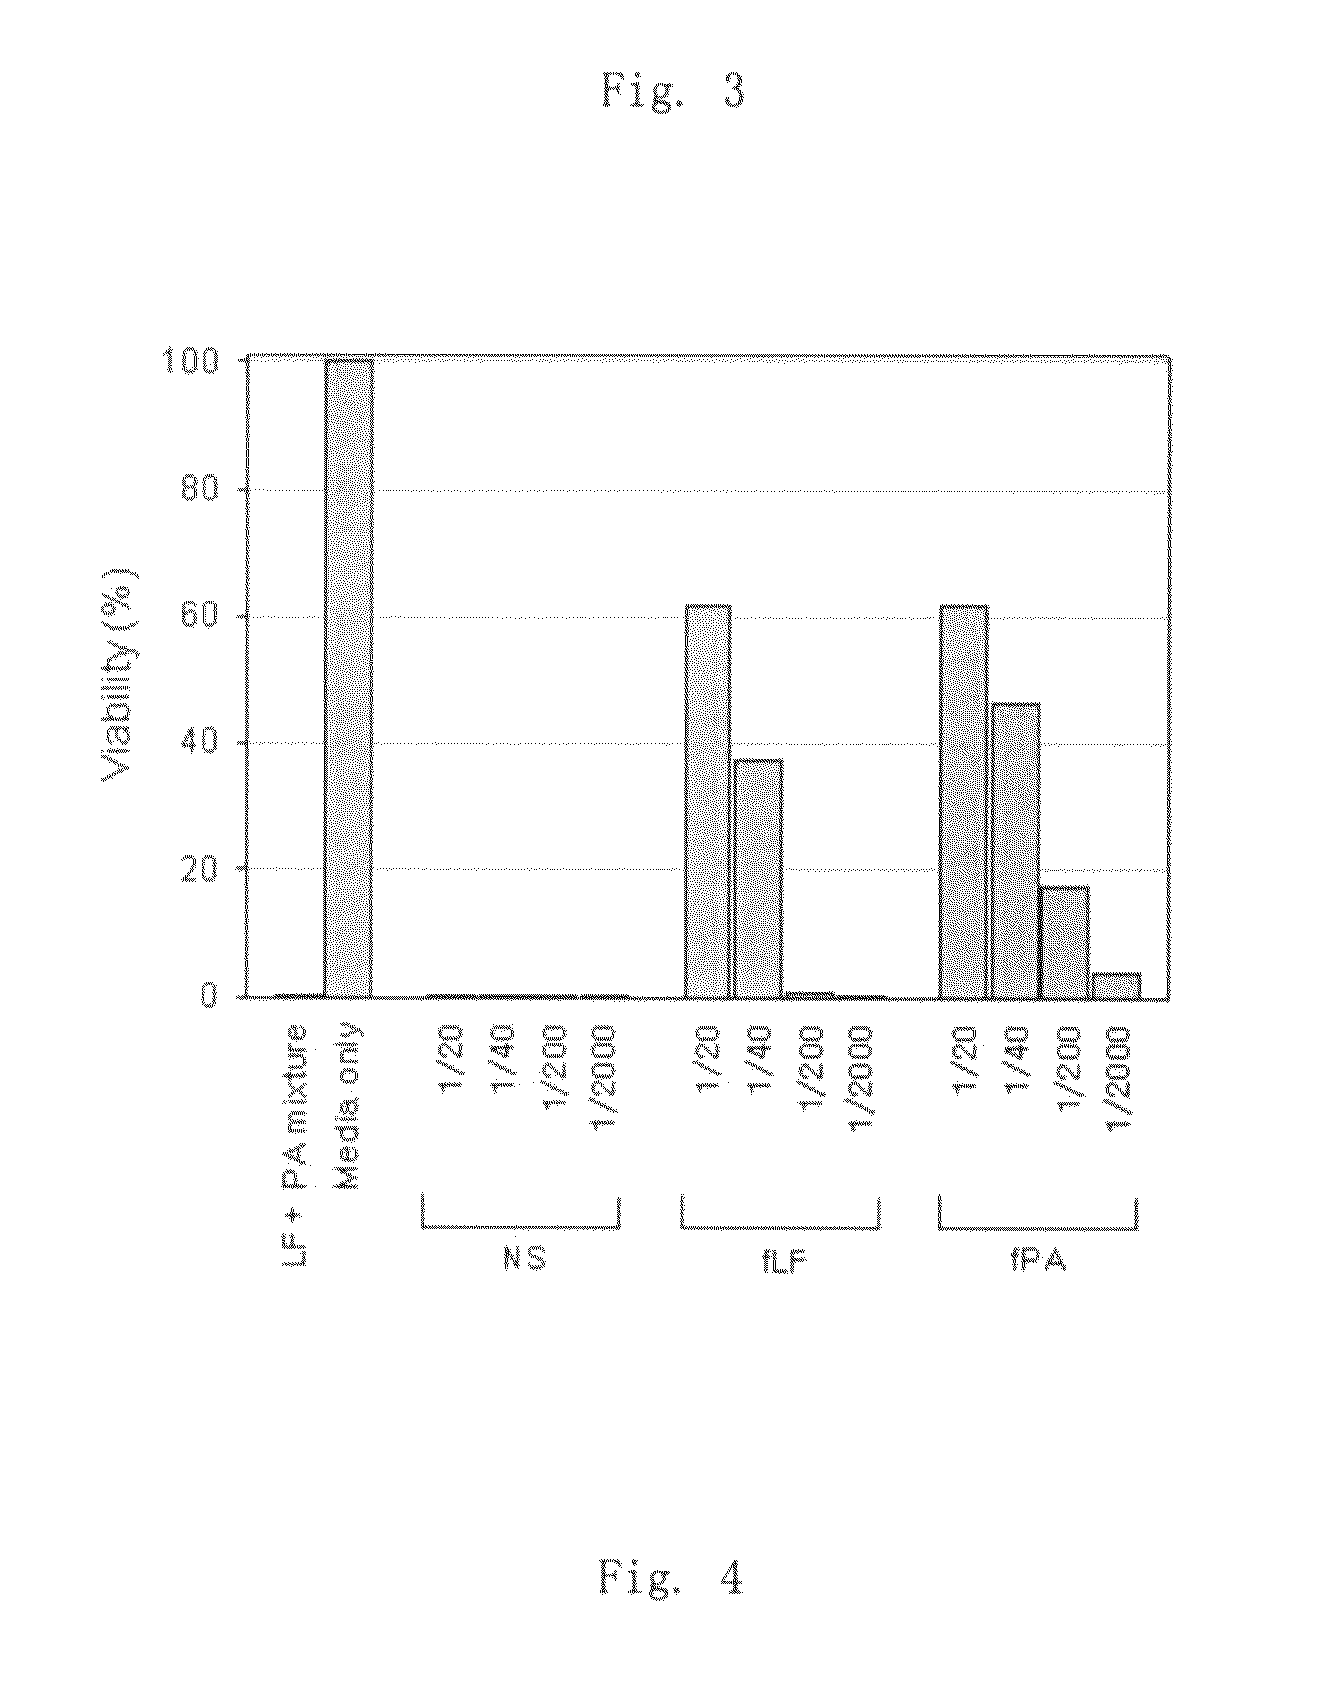 Monoclonal antibody specific to anthrax toxin